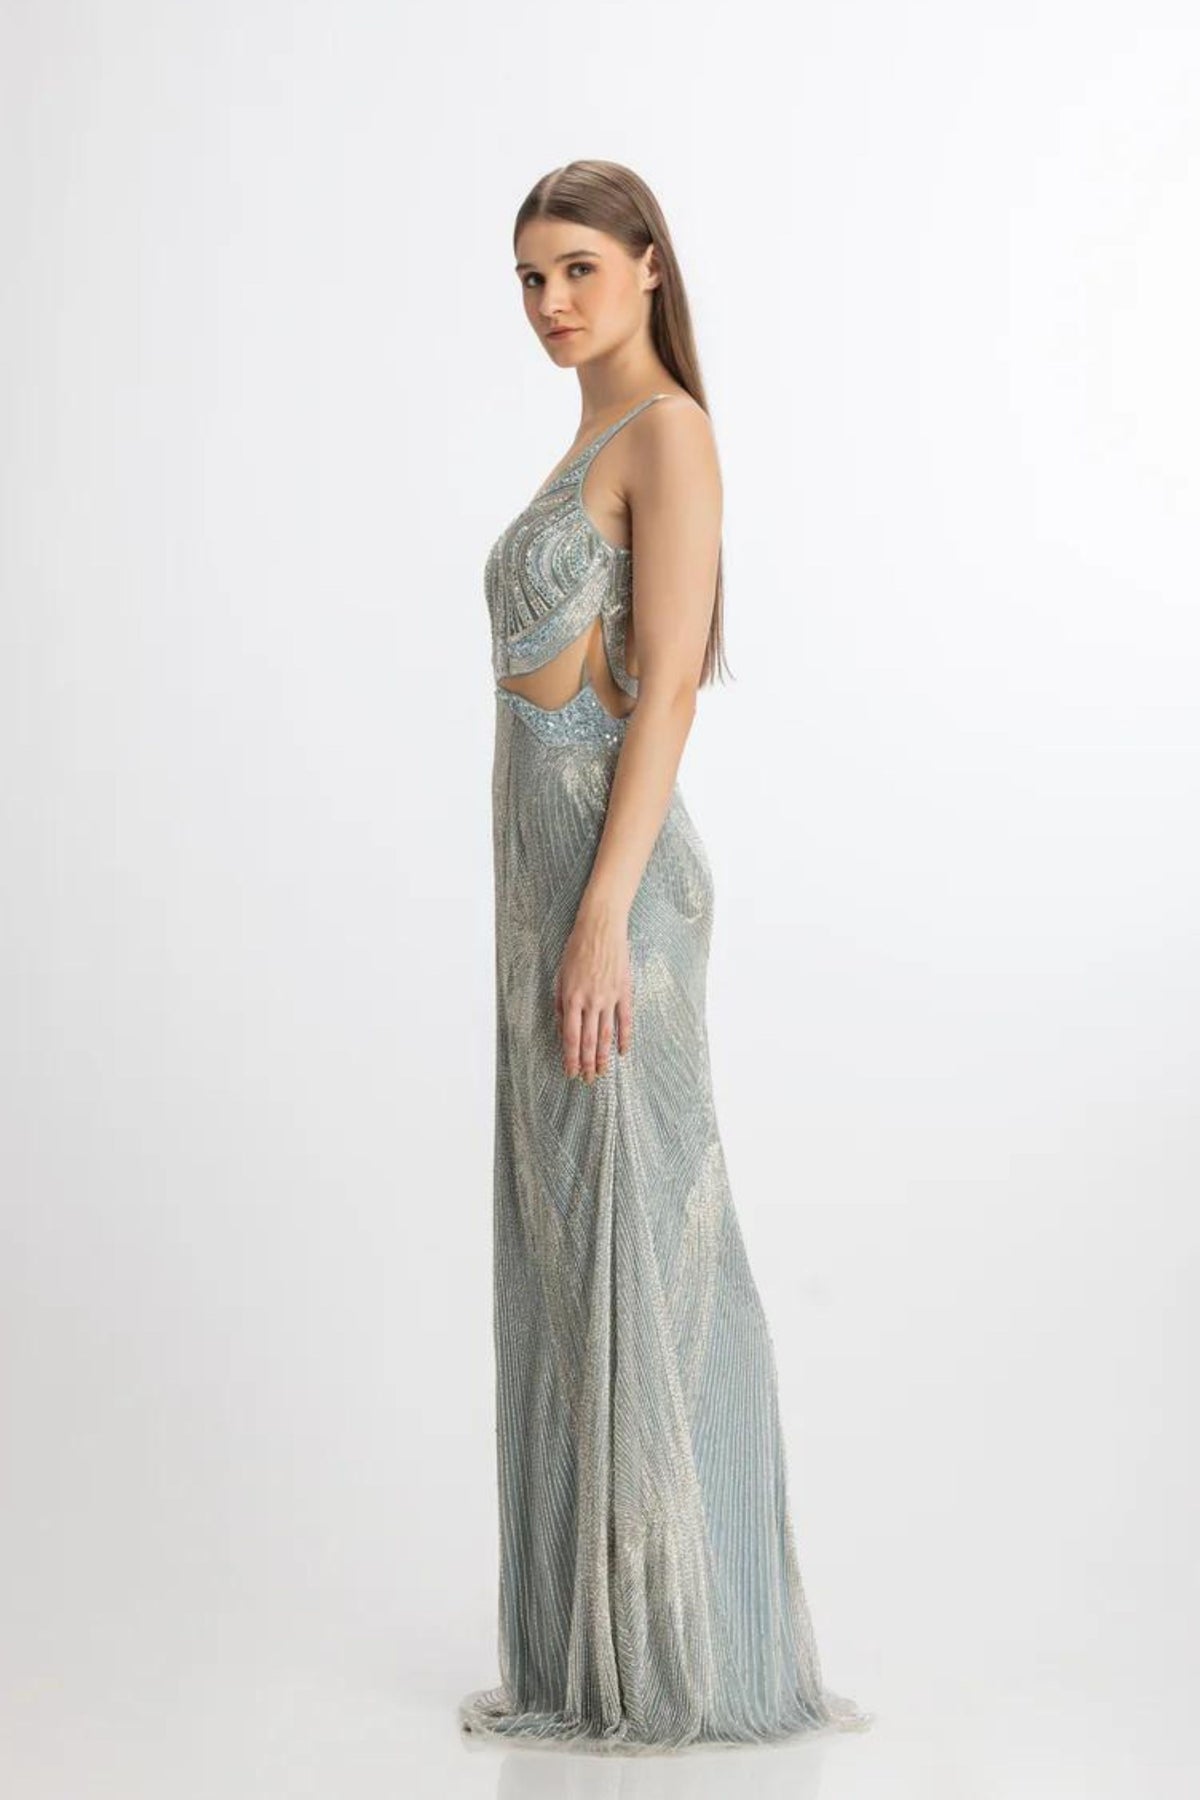 Icy blue cut-out gown